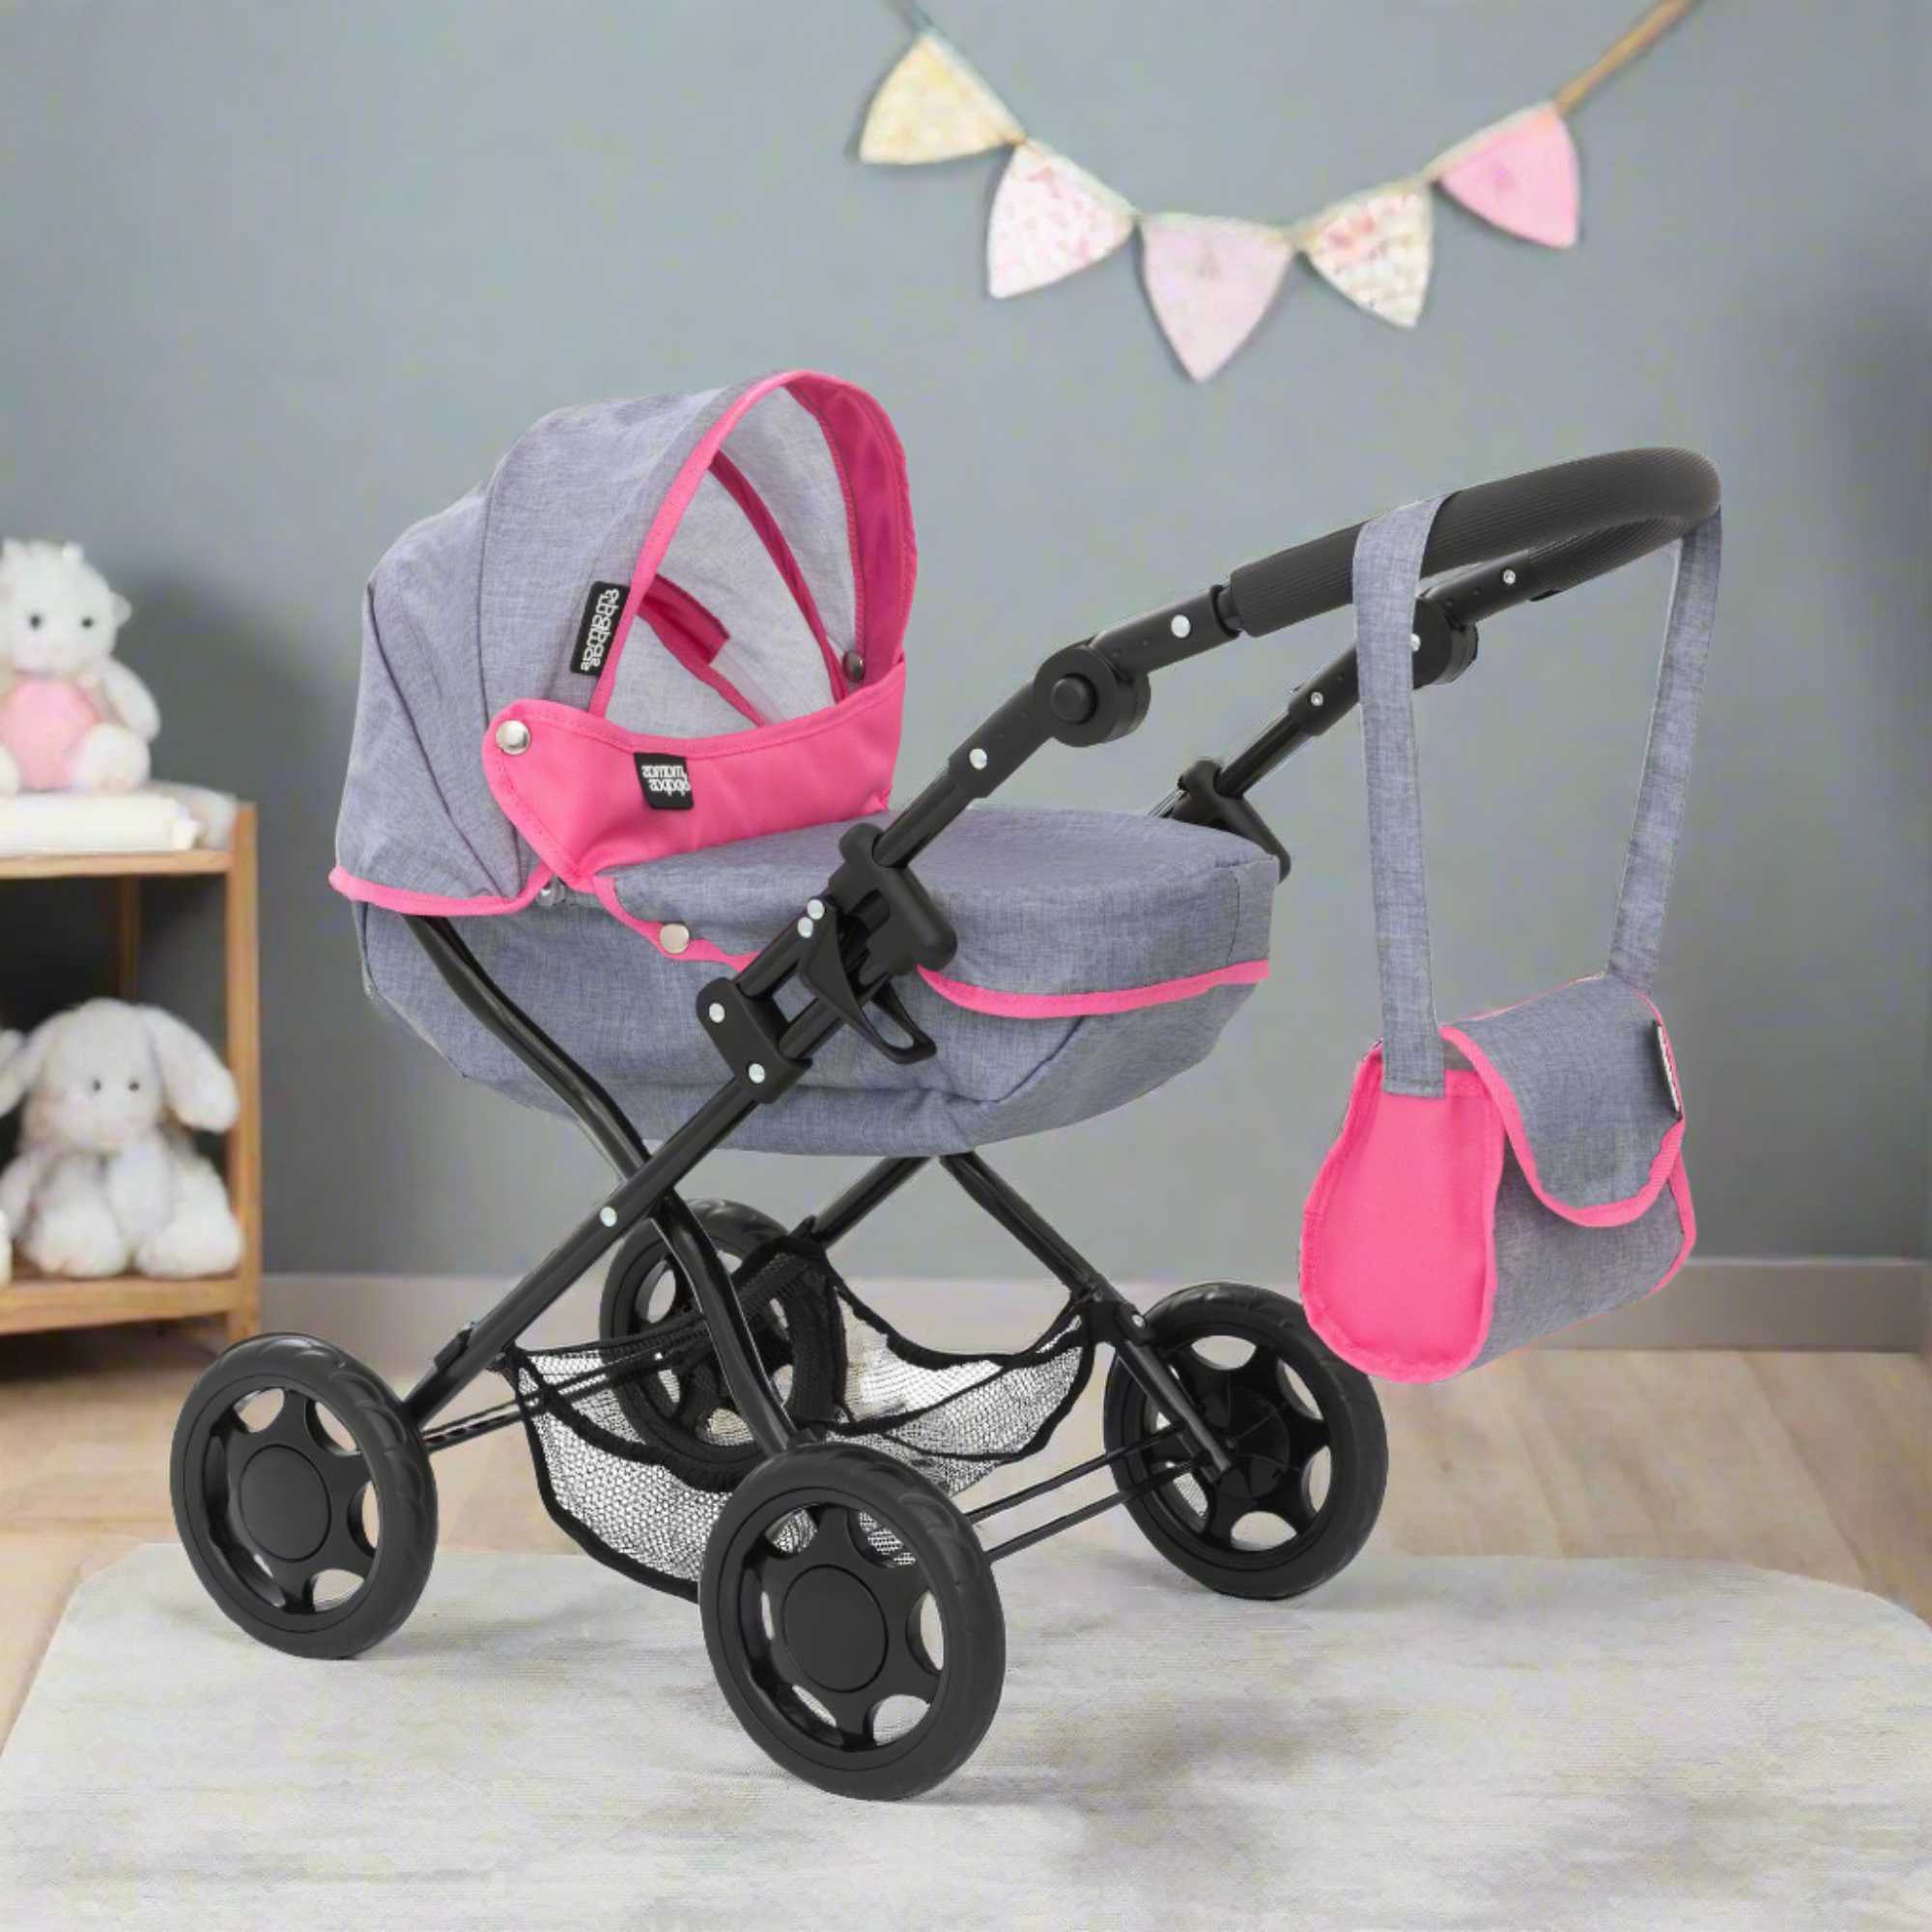 Mamas and Papas Junior Sweet Dreams Dolls Pram, featuring a vintage-inspired design with sturdy frame, adjustable handle height, and smooth-rolling wheels, perfect for imaginative play with dolls.